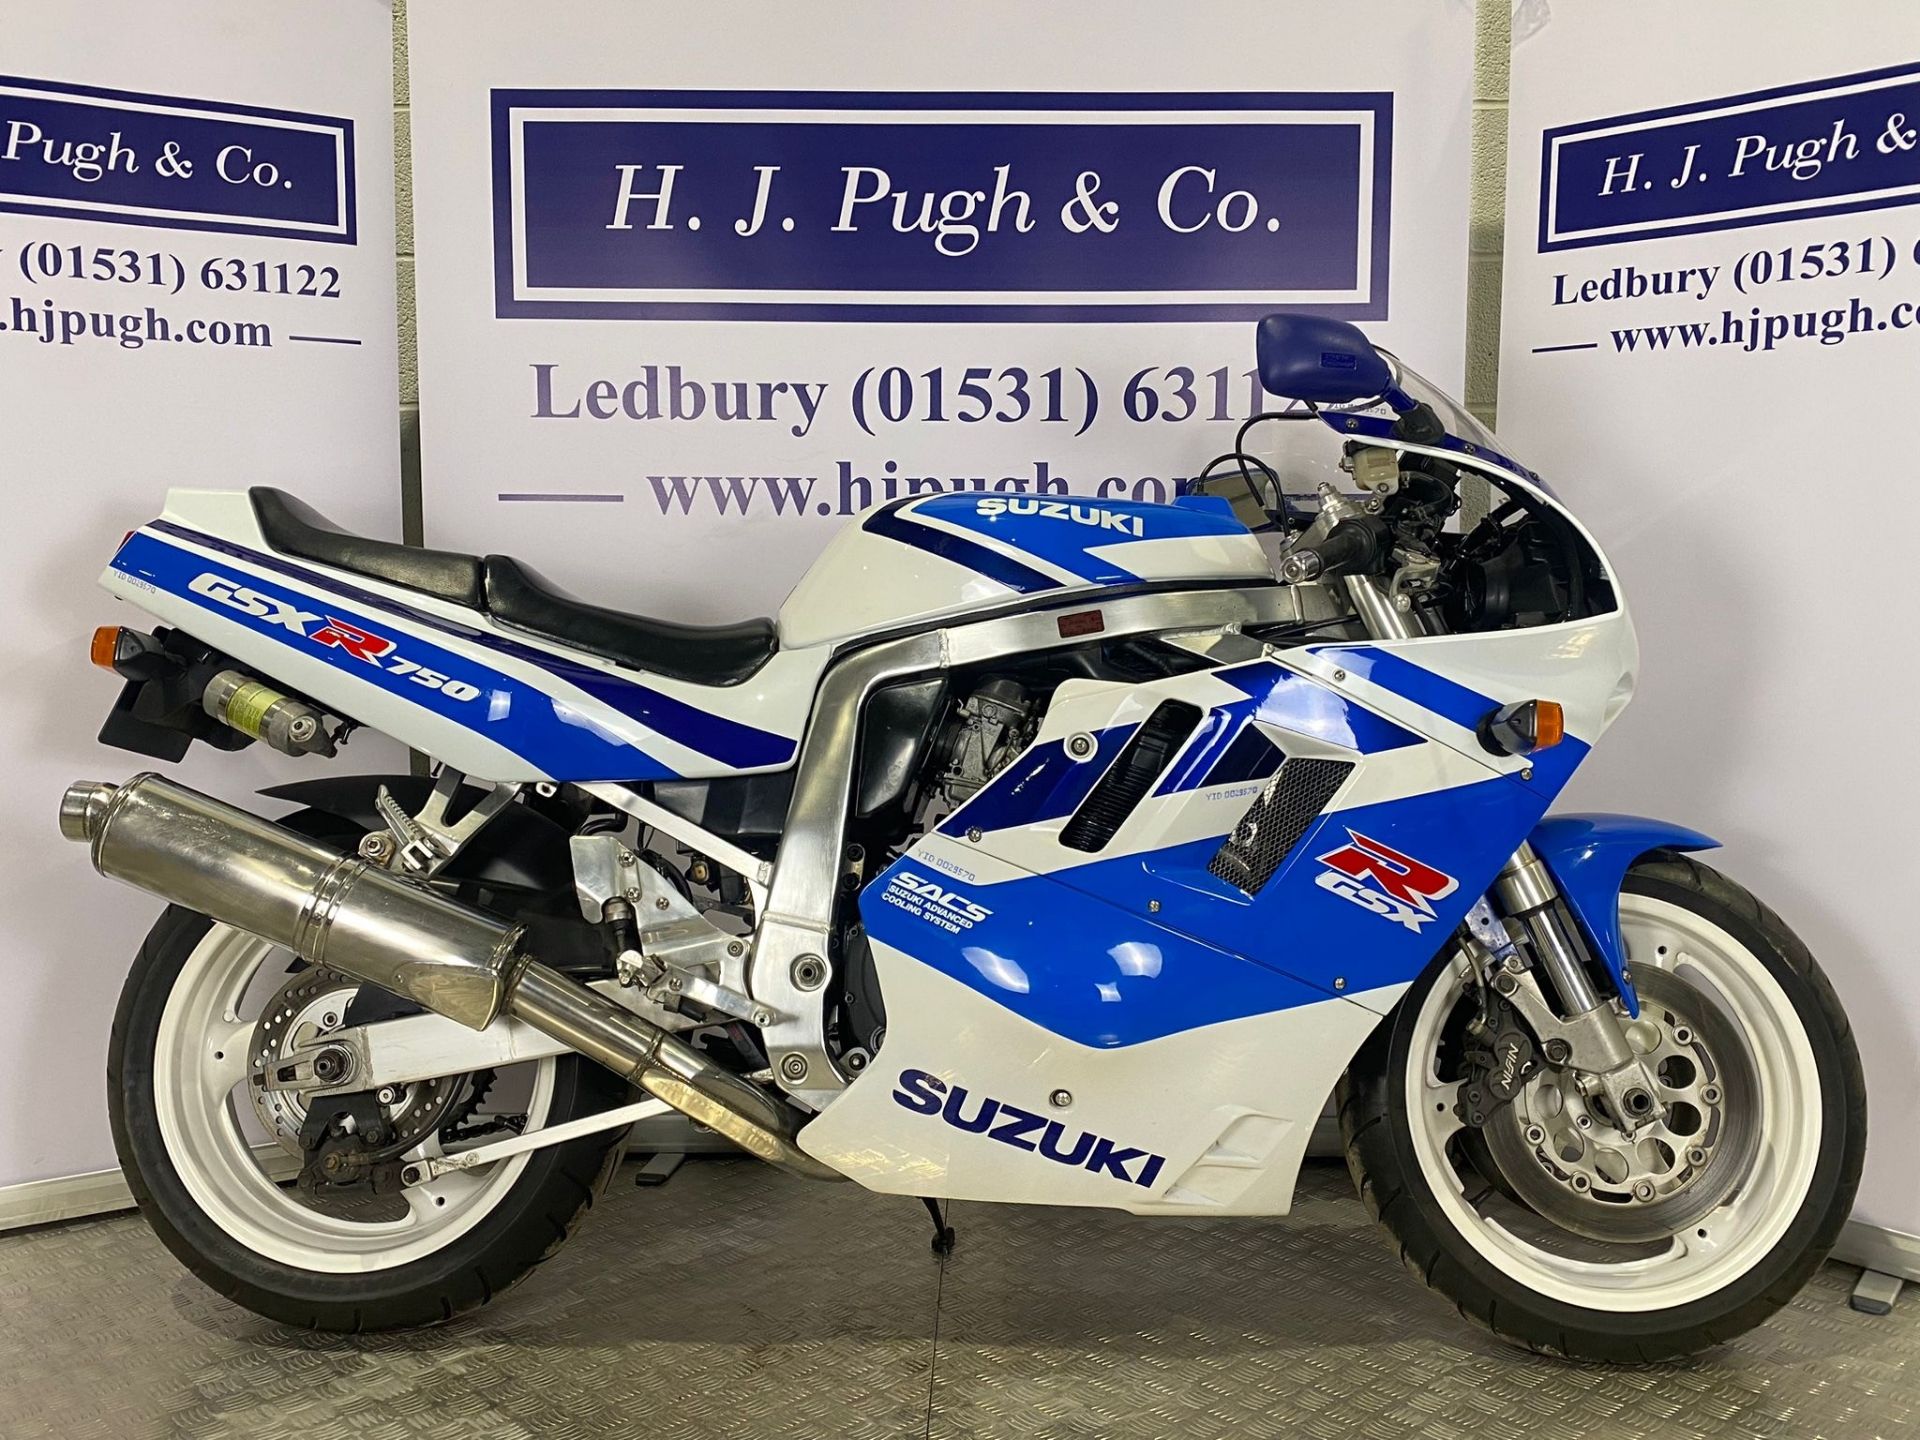 Suzuki GSXR750 motorcycle. 1991. 749cc Runs and rides but has been on display for several years so